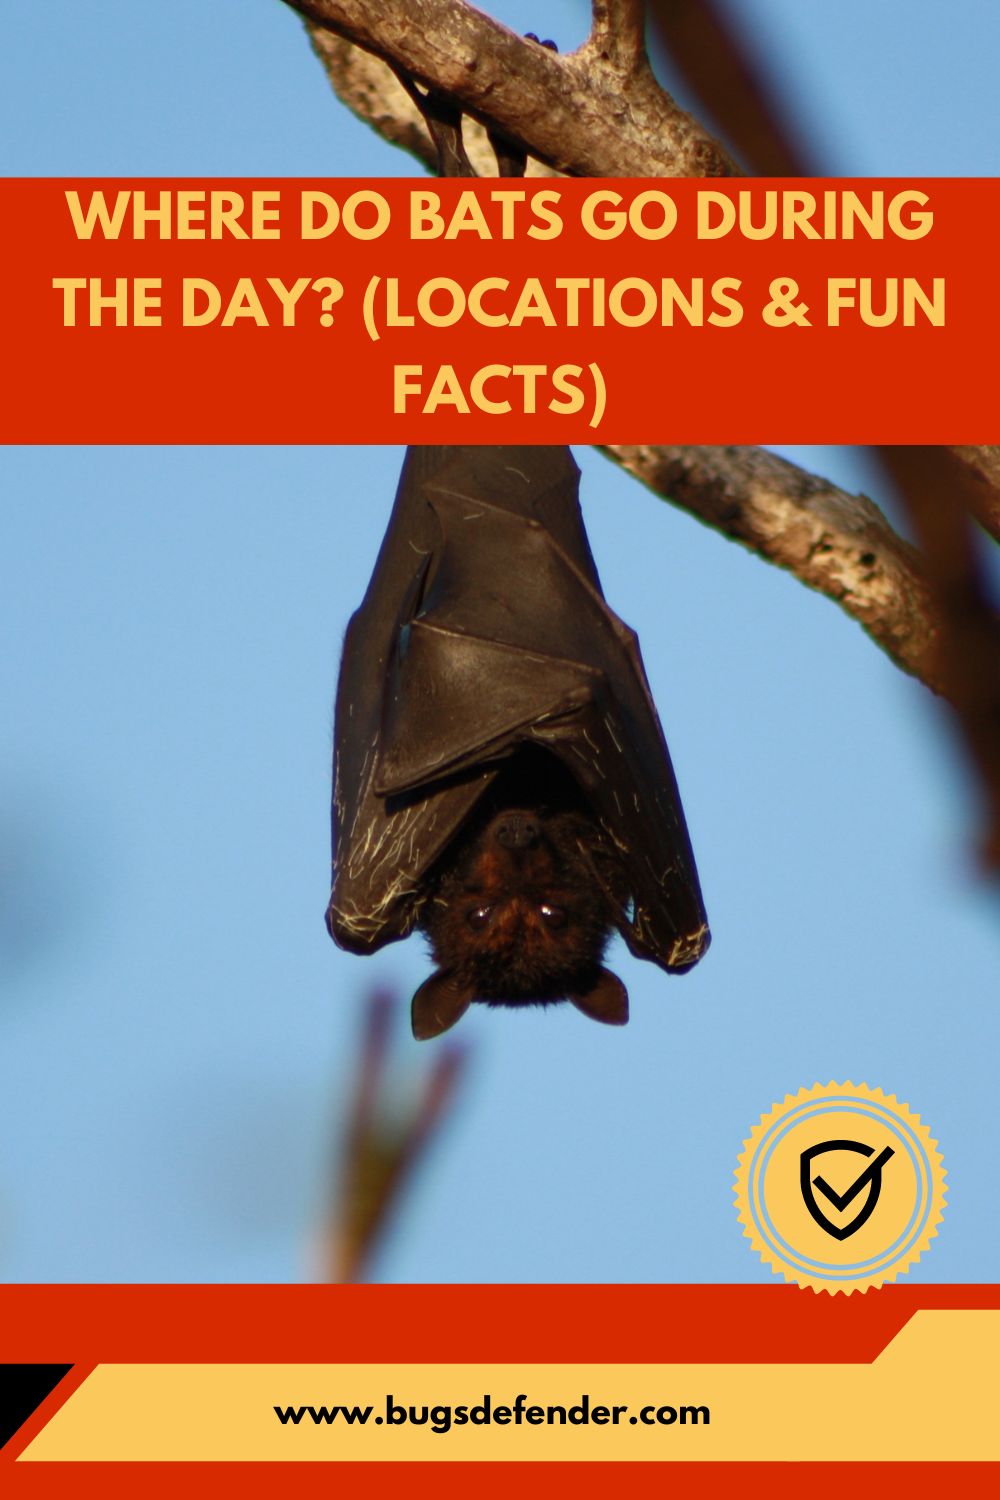 Where Do Bats Go During the Day? (Locations & Fun Facts) pin2